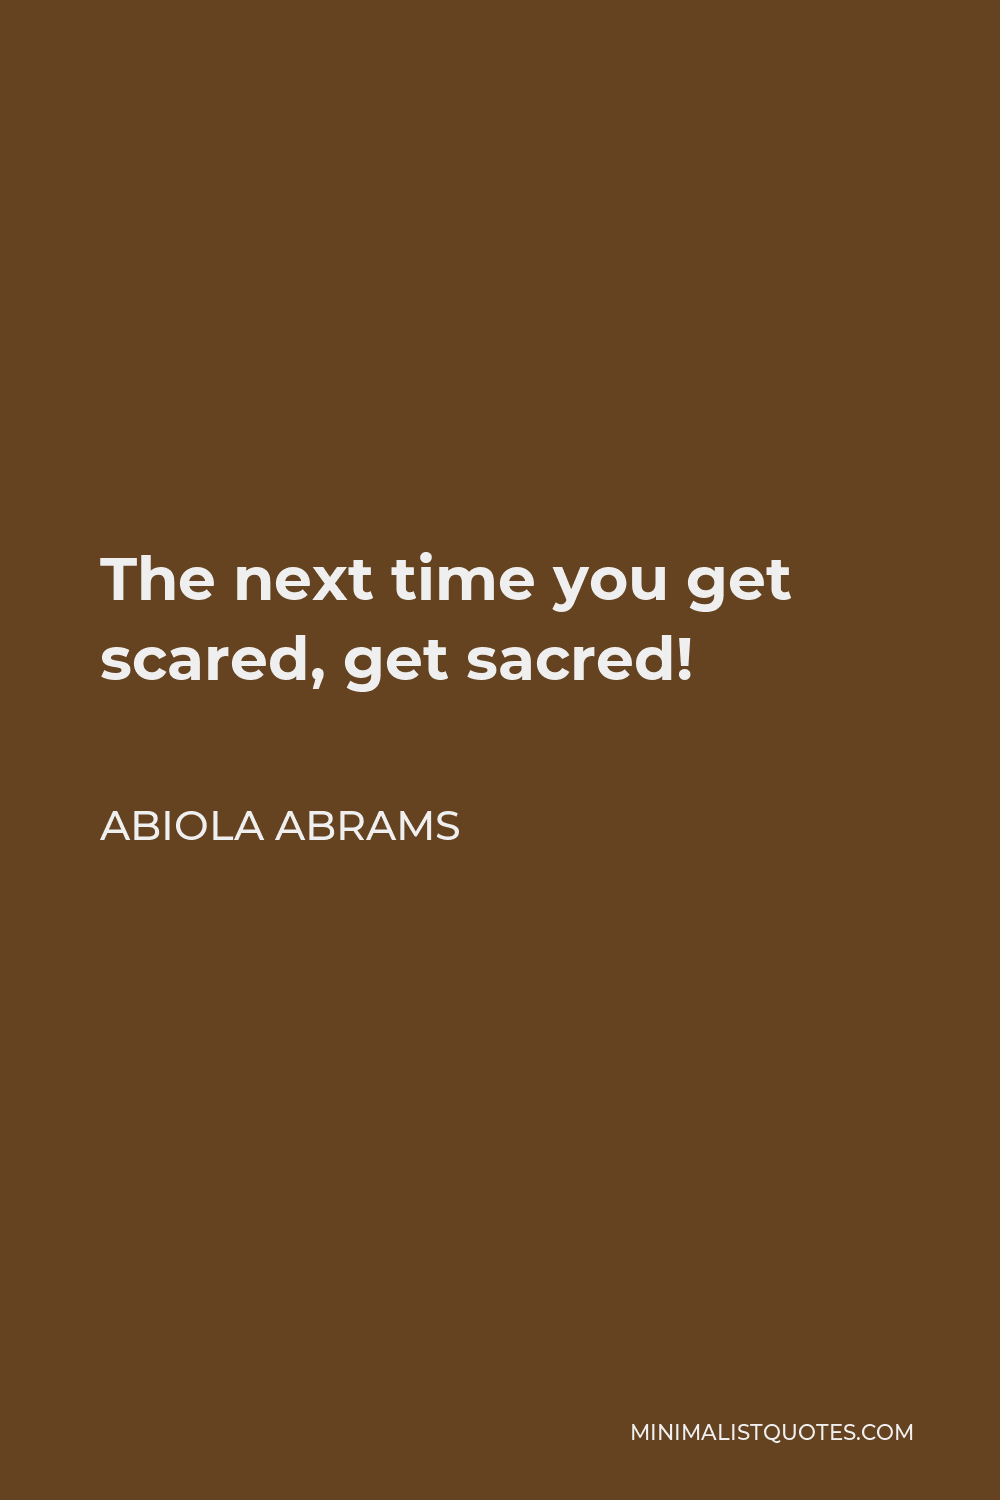 Abiola Abrams Quote - The next time you get scared, get sacred!